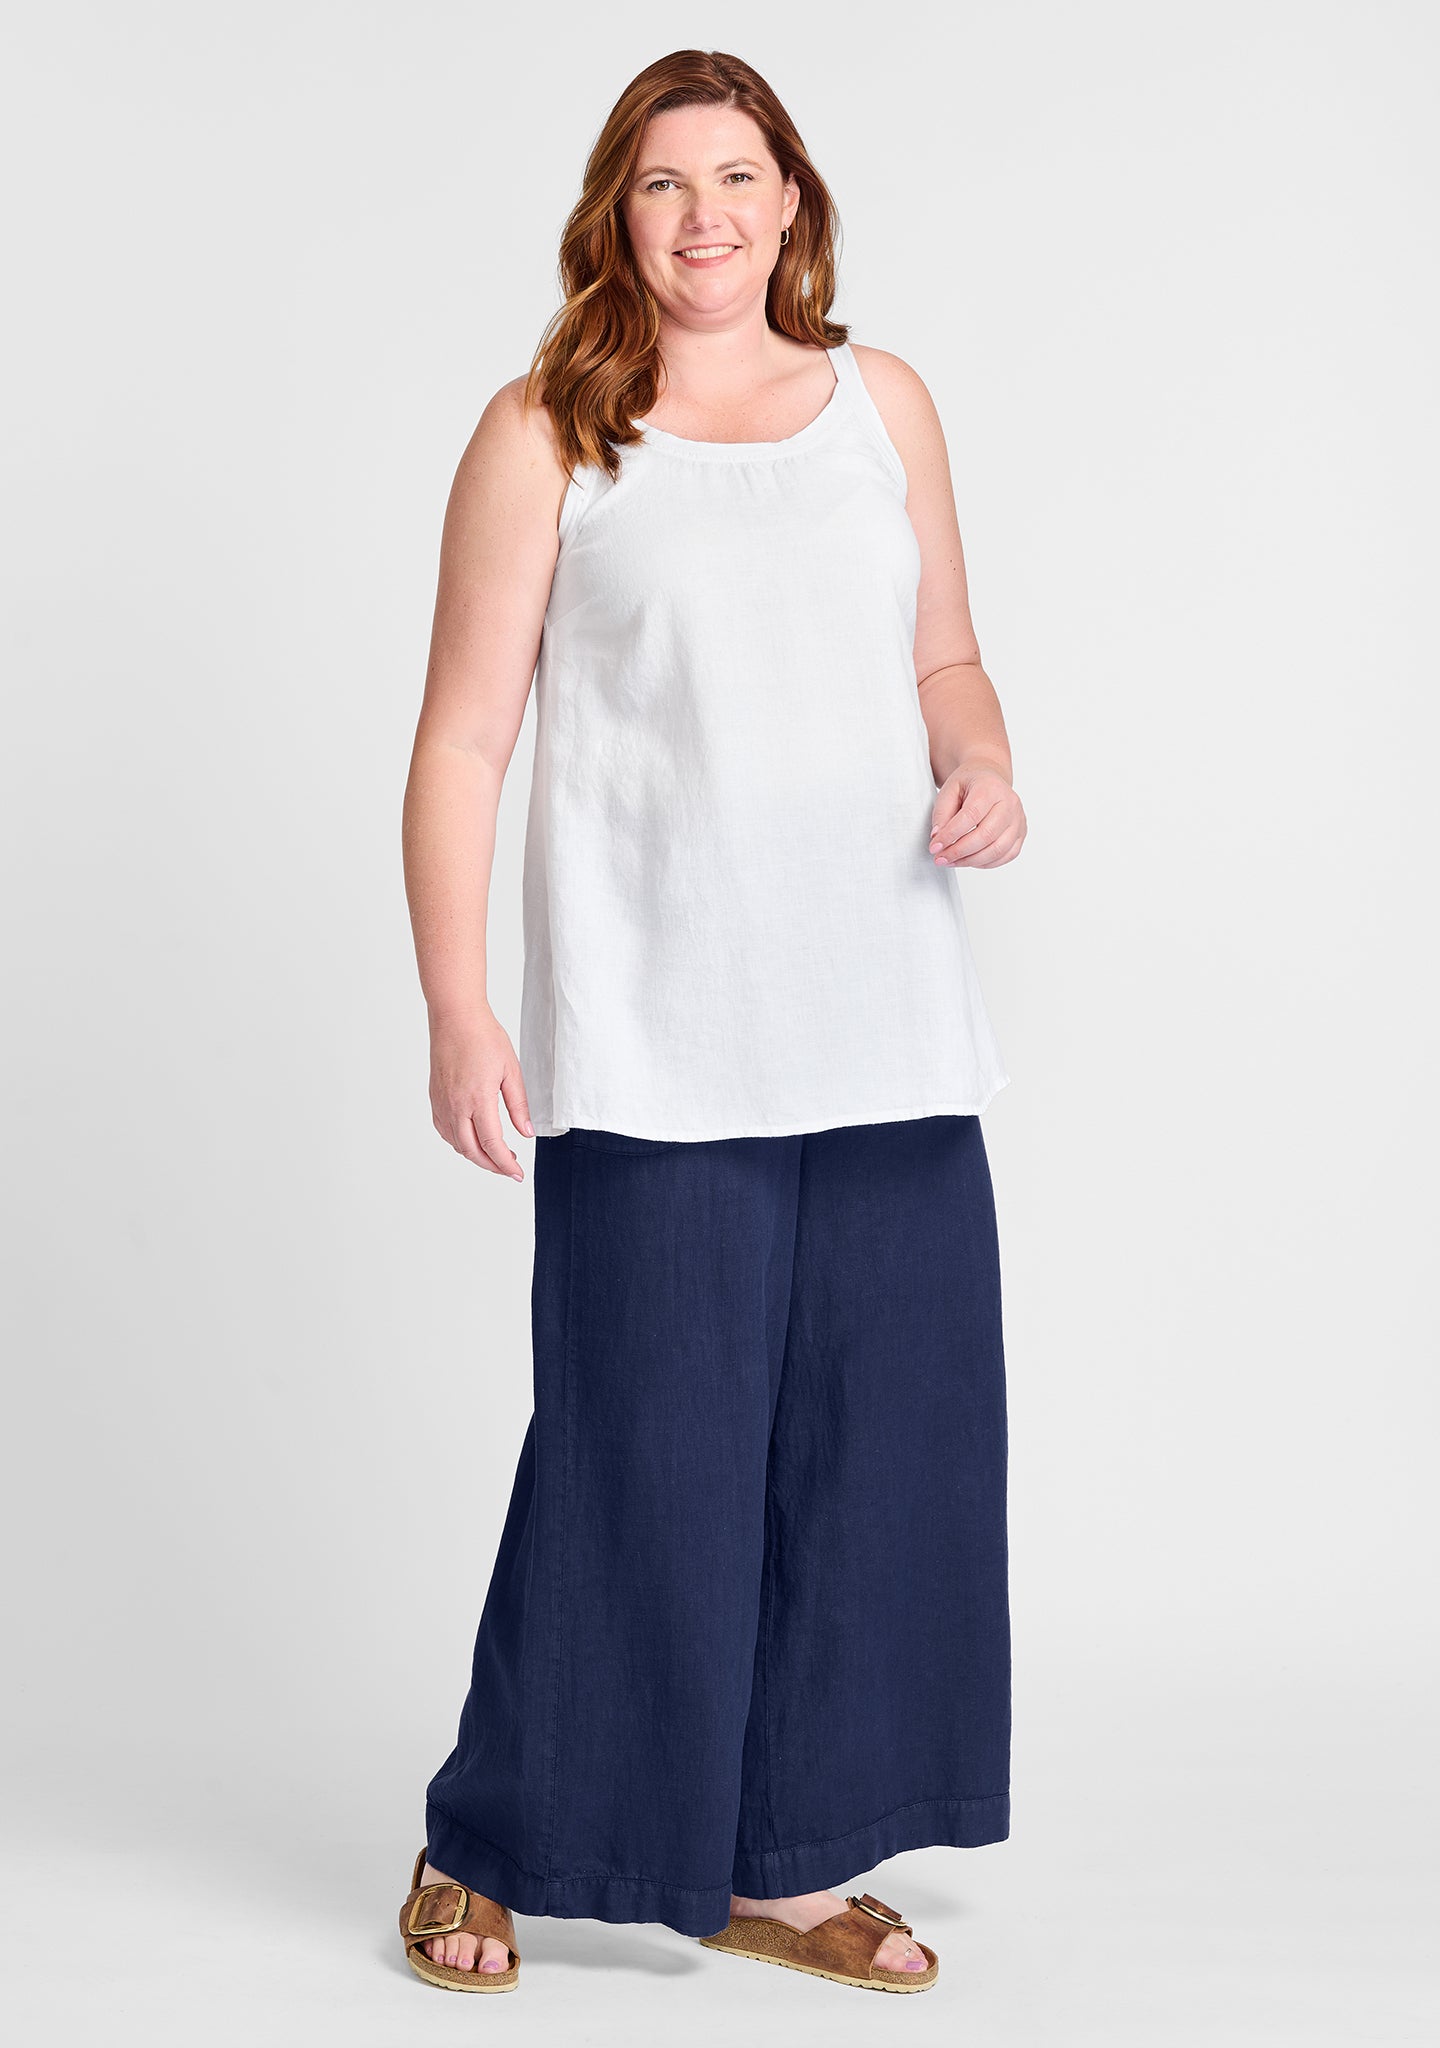 FLAX linen tank in white with linen pants in blue